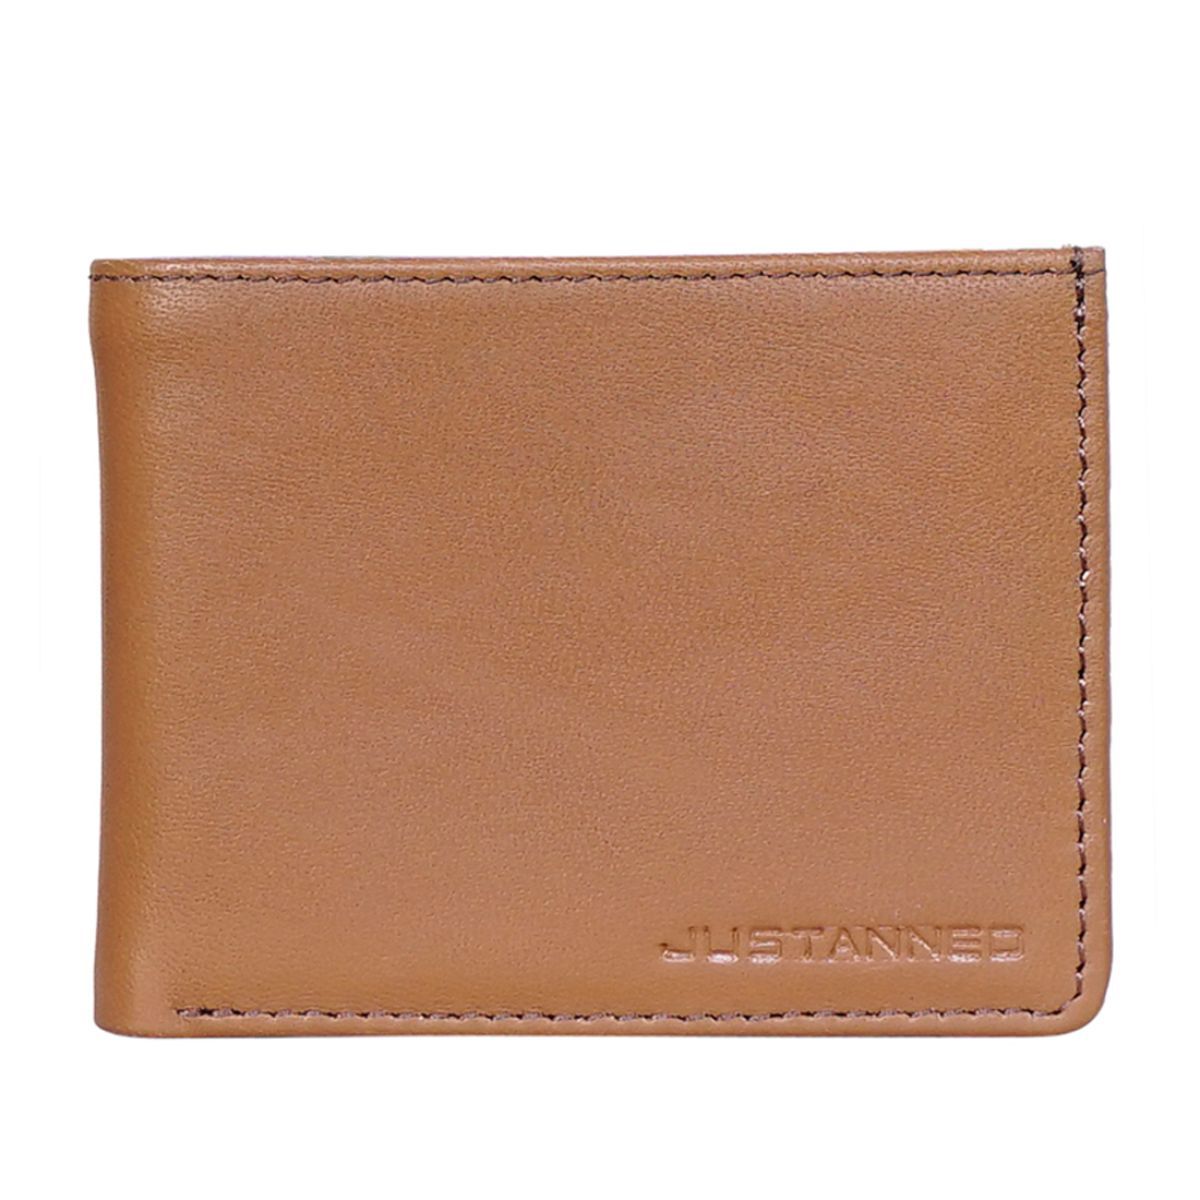 Justanned Smart Wallet In Tan Leather